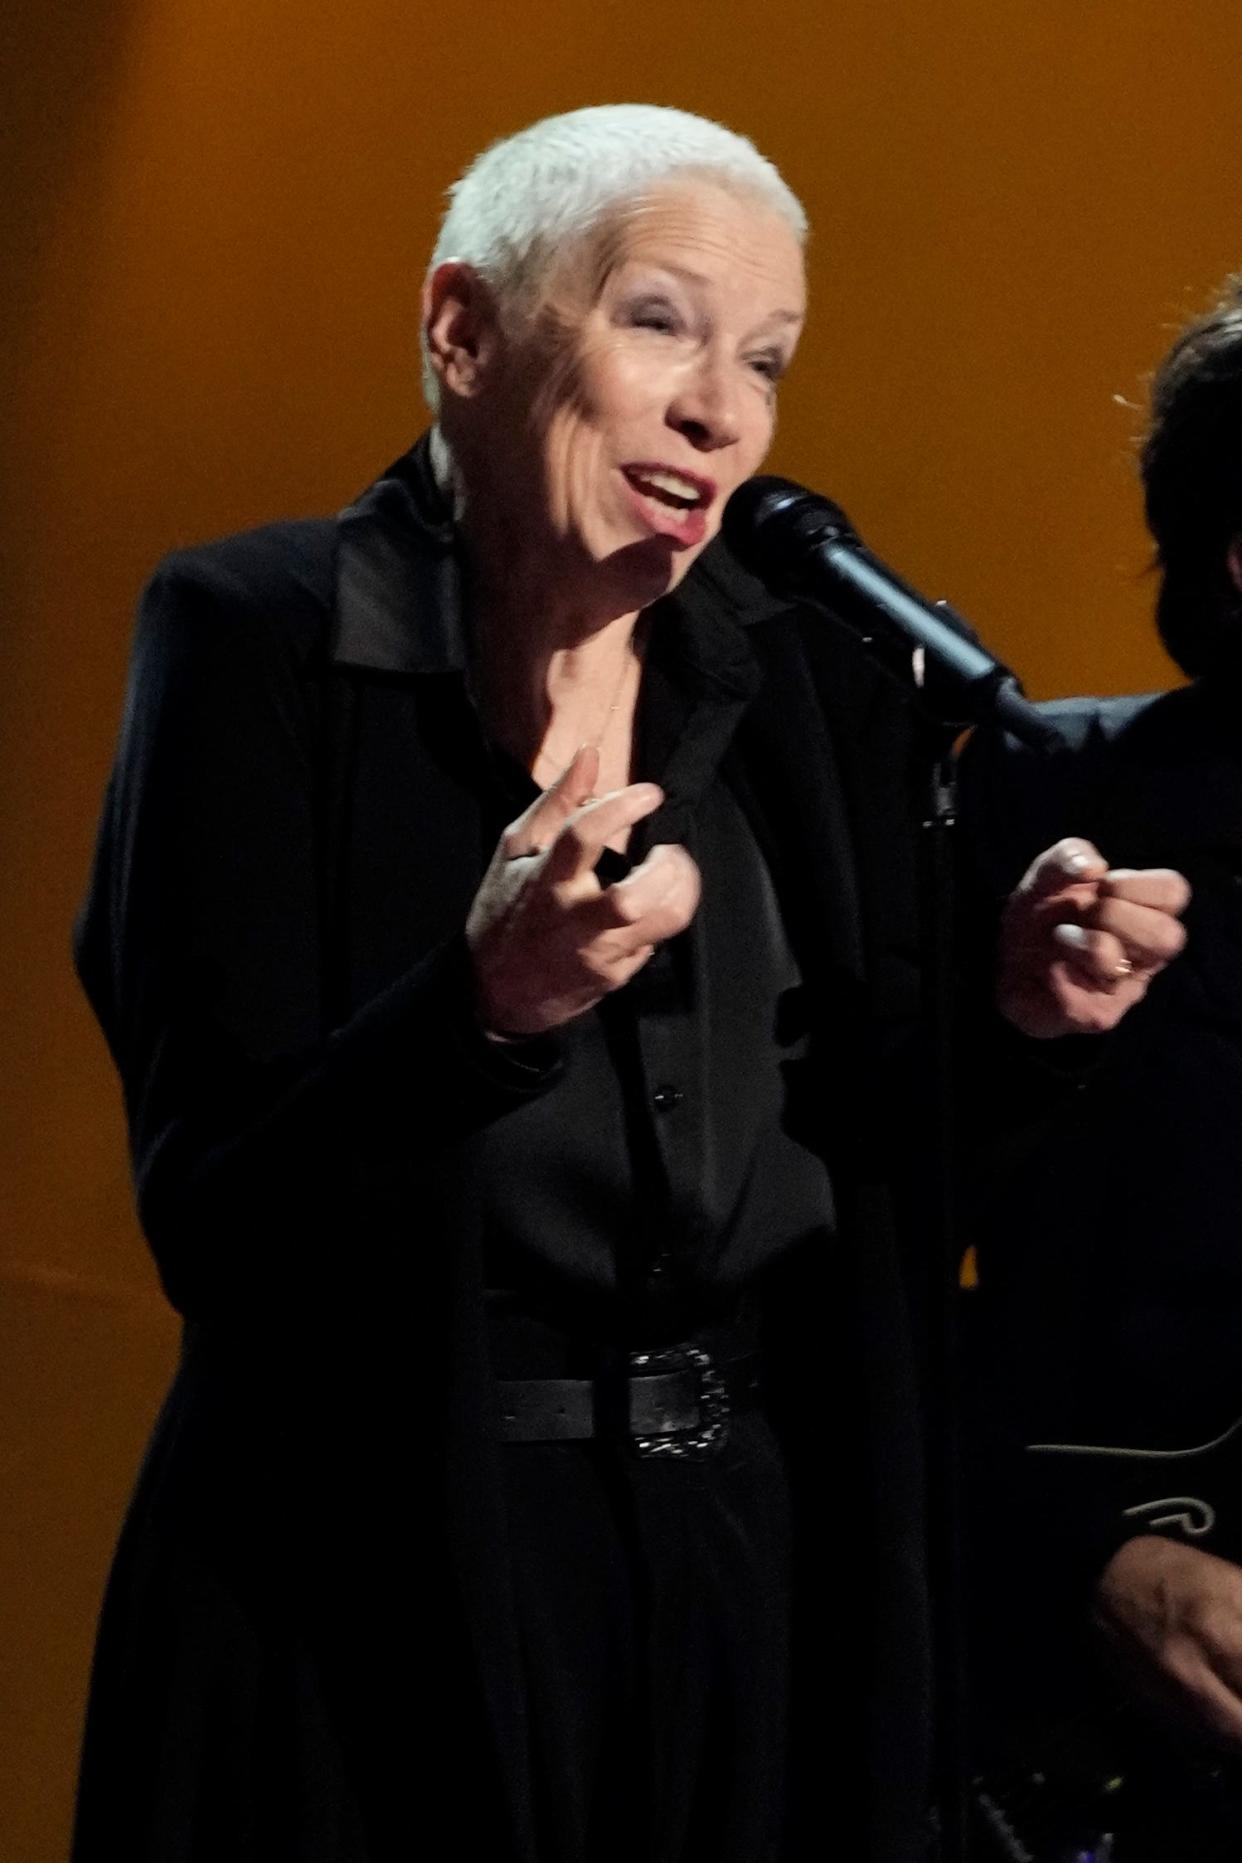 Annie Lennox performs during the Sinead O'Connor In Memoriam segment during the Grammys on Sunday.